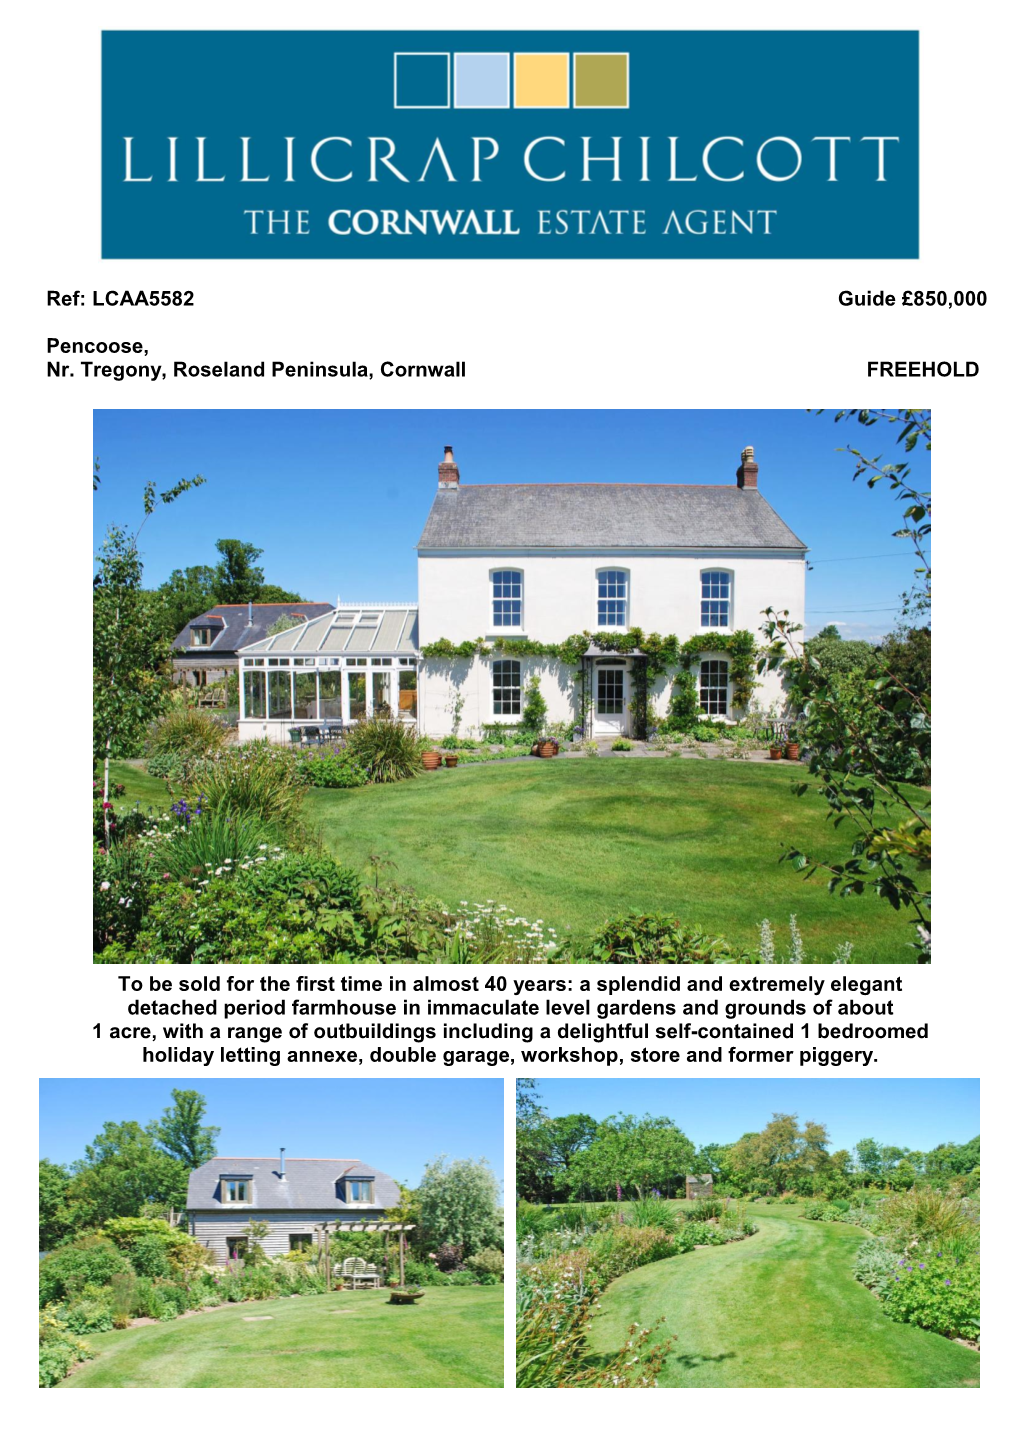 Ref: LCAA5582 Guide £850,000